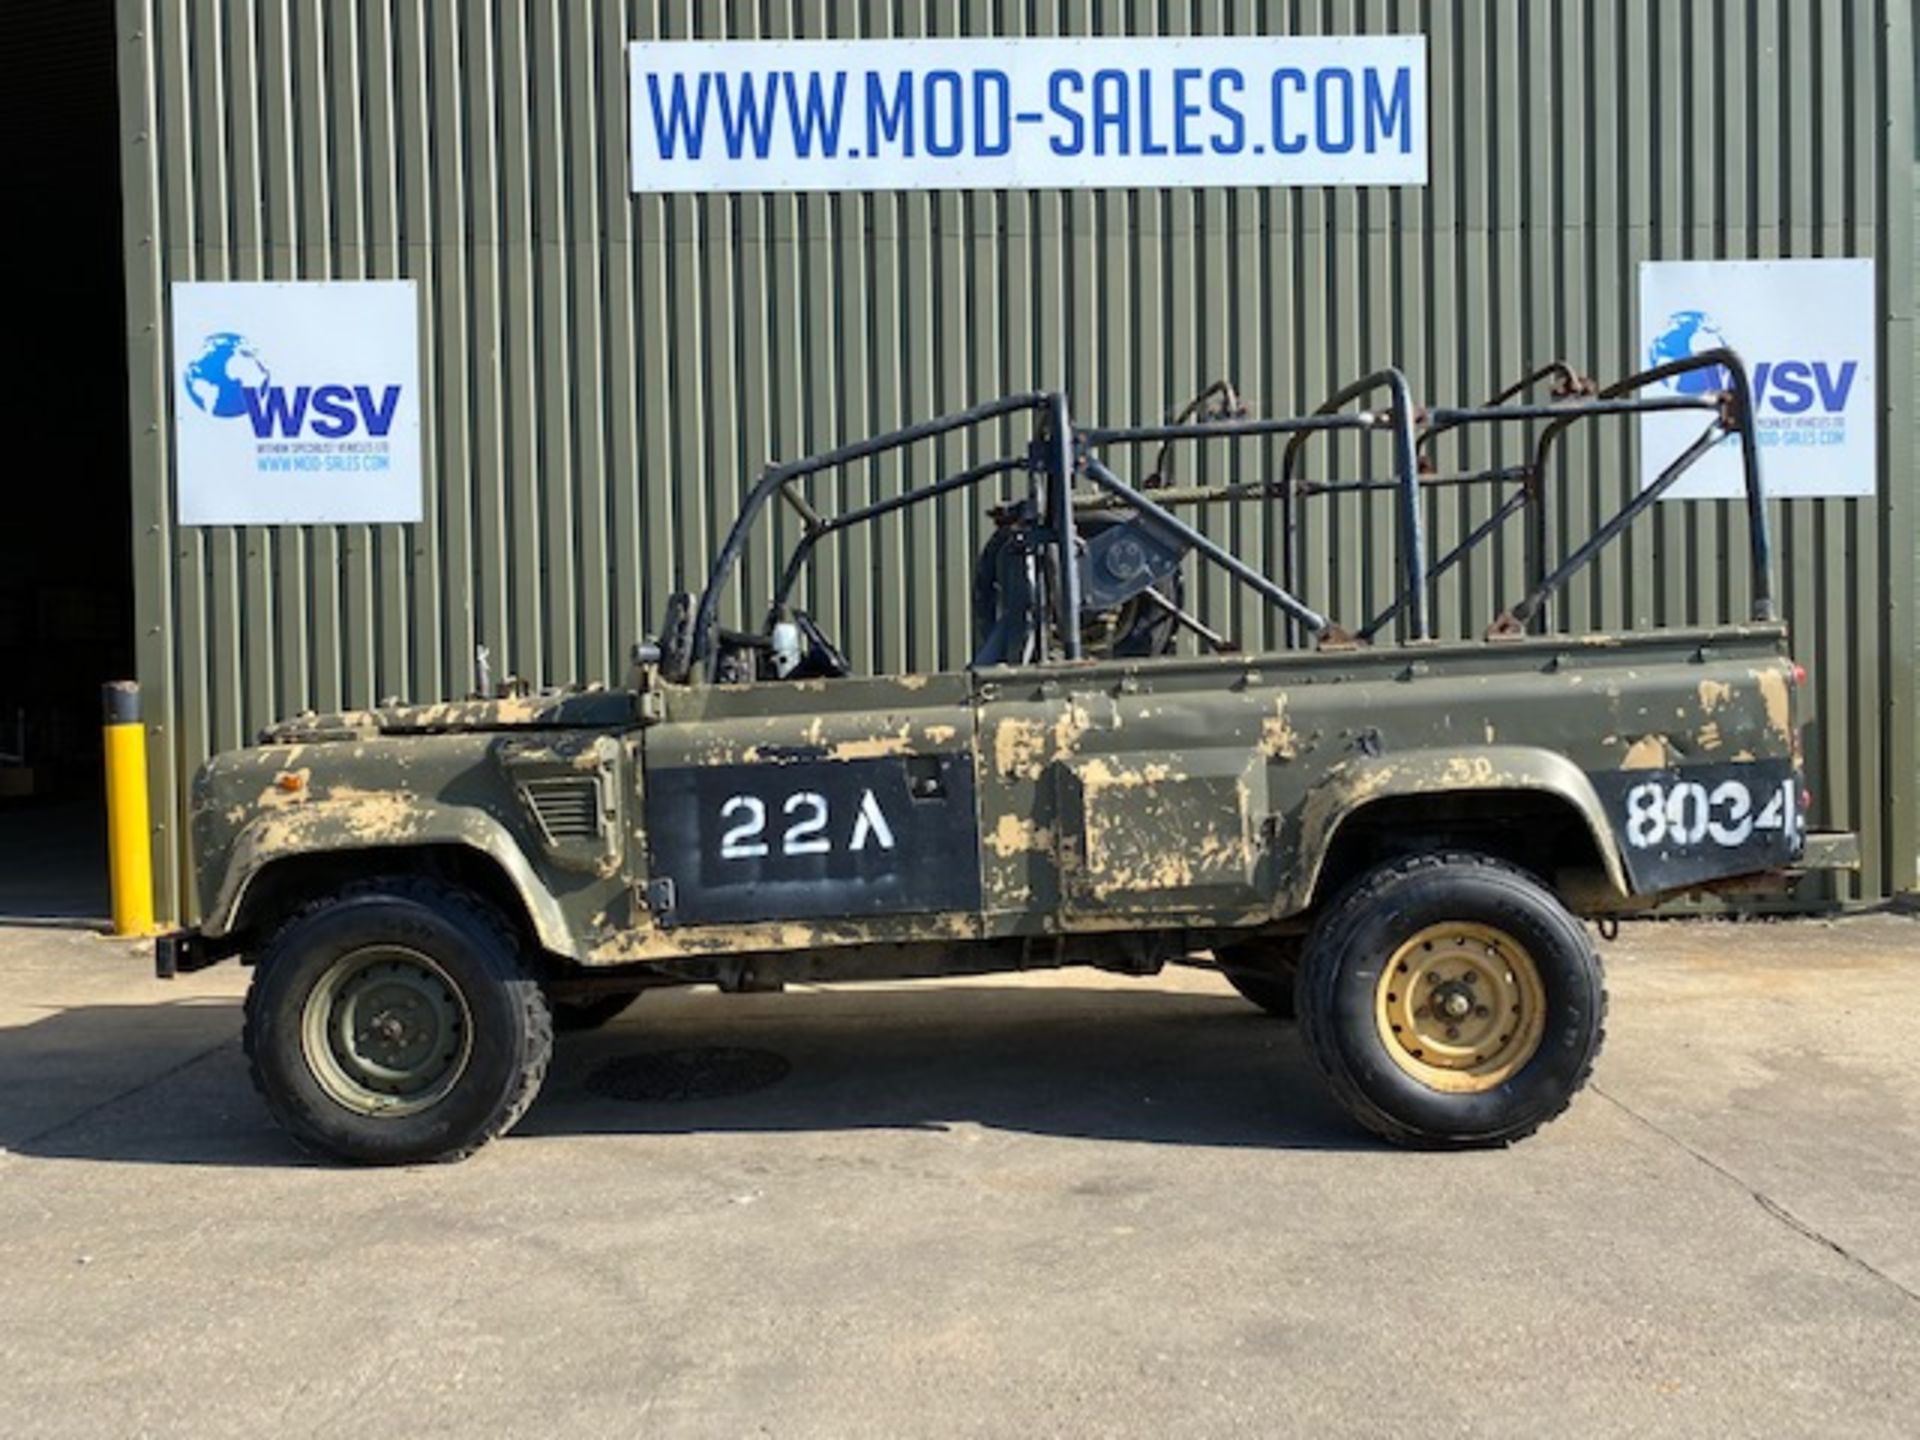 Land Rover Defender Wolf 110 Scout vehicle - Image 6 of 53